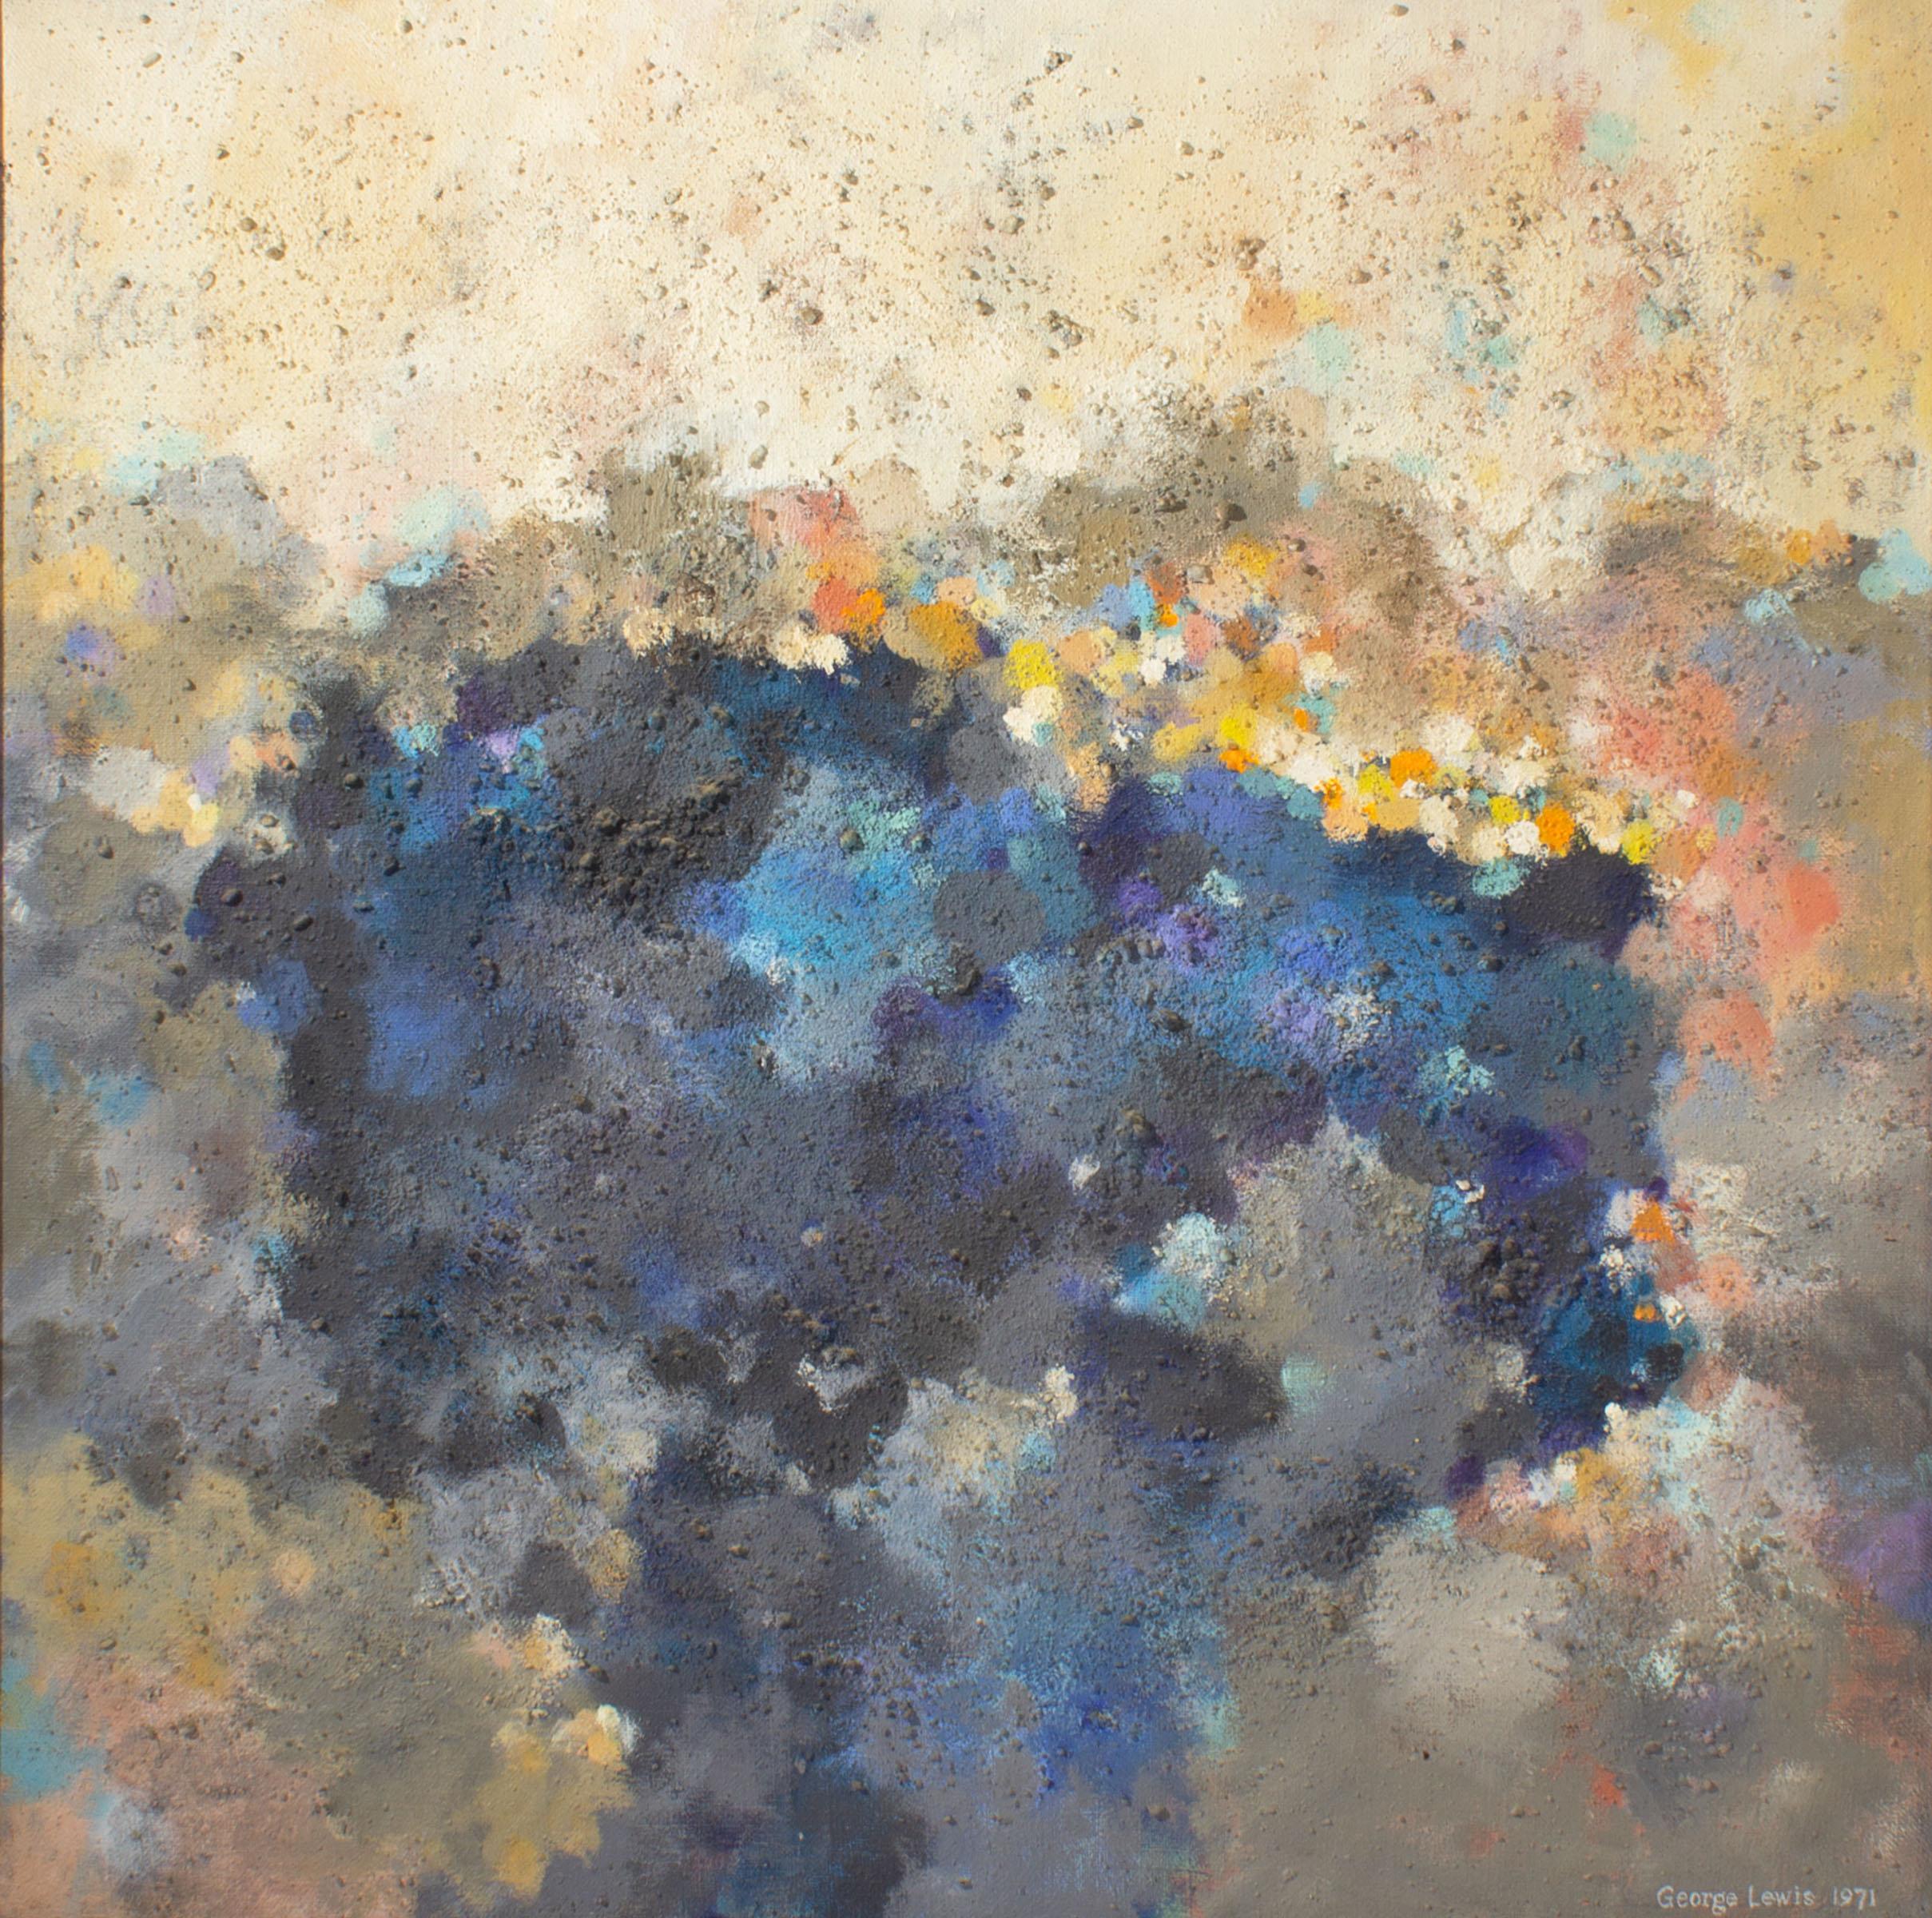 A 1971 oil on canvas abstract painting by American Contemporary artist George Lewis. This textured abstract composition depicts clouds of color that meld together. Blue, black, and gray forms populate the center of the piece and transform into dabs